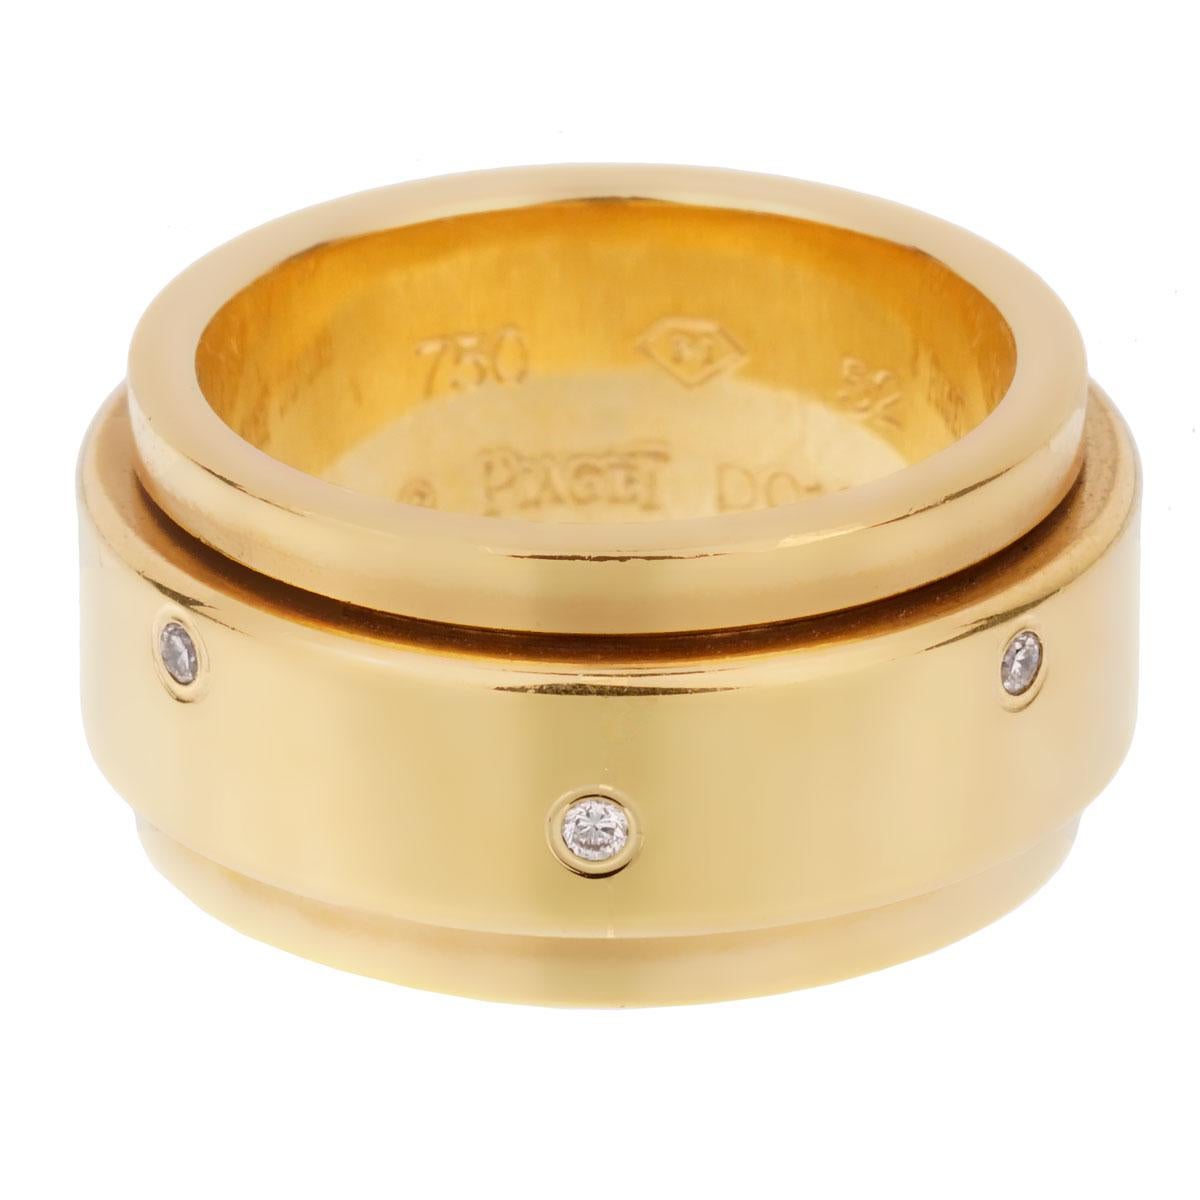 An iconic Piaget Possession ring, the center band freely spins and is set with 7 round brilliant cut diamonds in 18k yellow gold. The ring measures a size 6 1/2

Sku: 1915